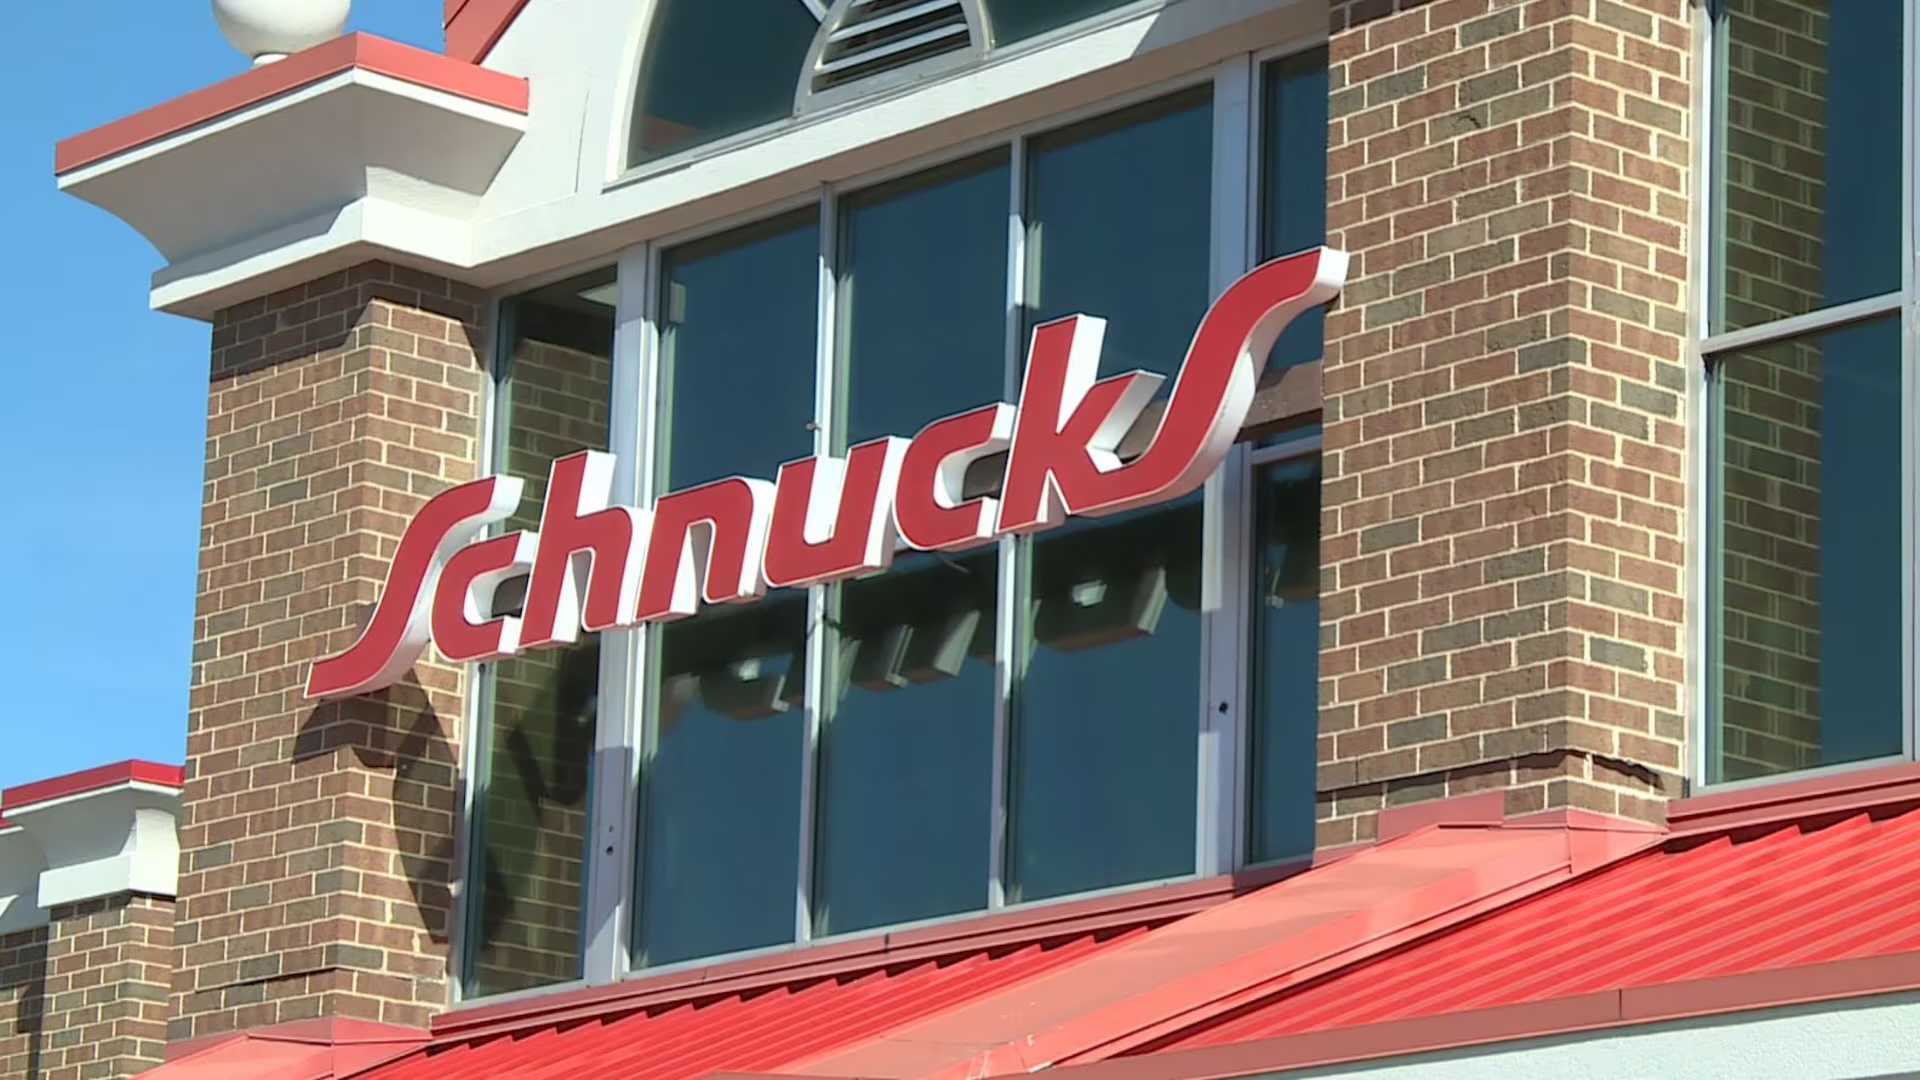 Teamsters Local 610 drivers approve new contract with Schnucks and prevent strike